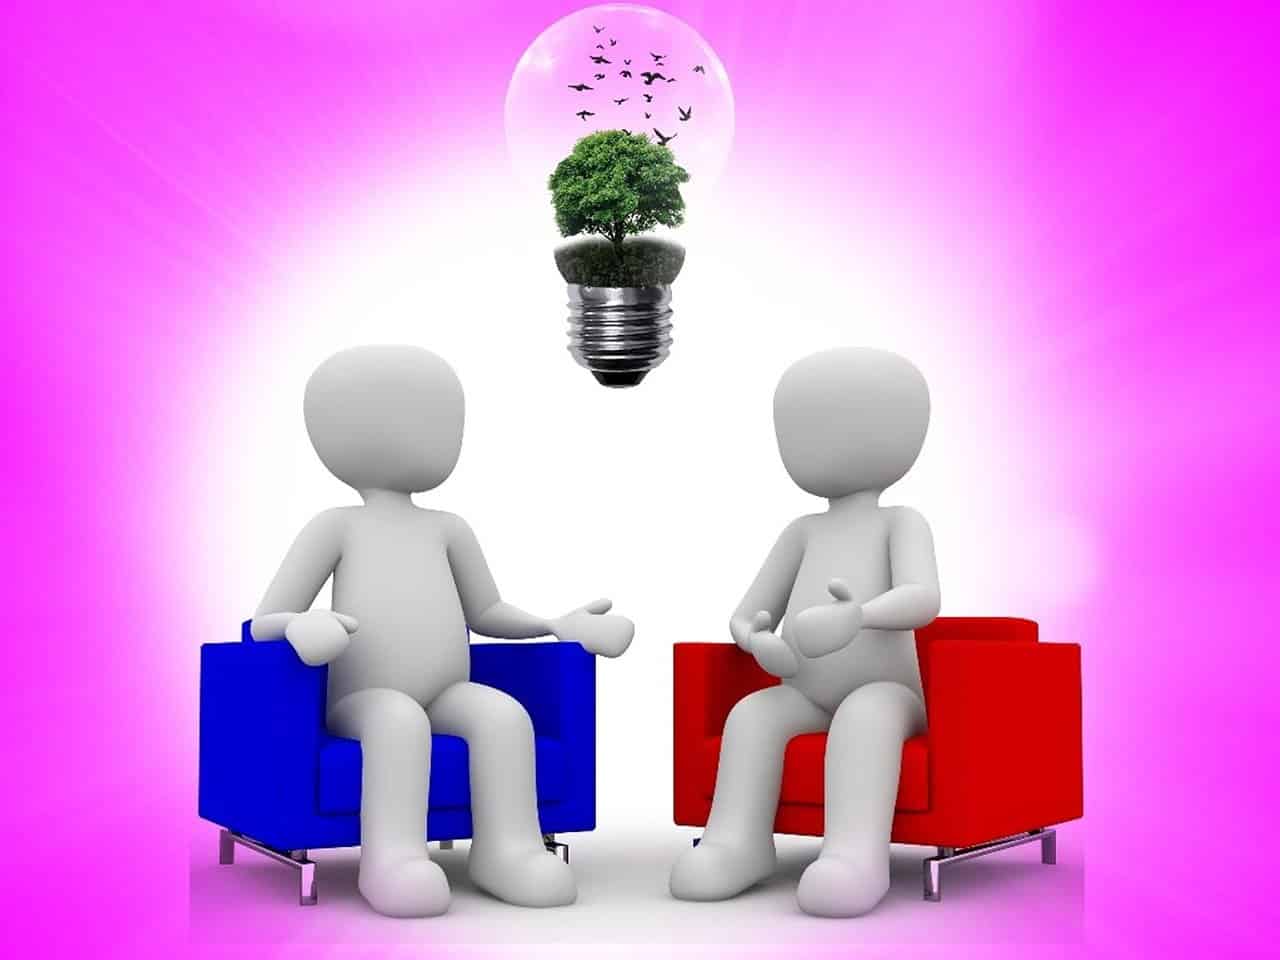 Appointment Meeting Lamp Bulb  - mary1826 / Pixabay